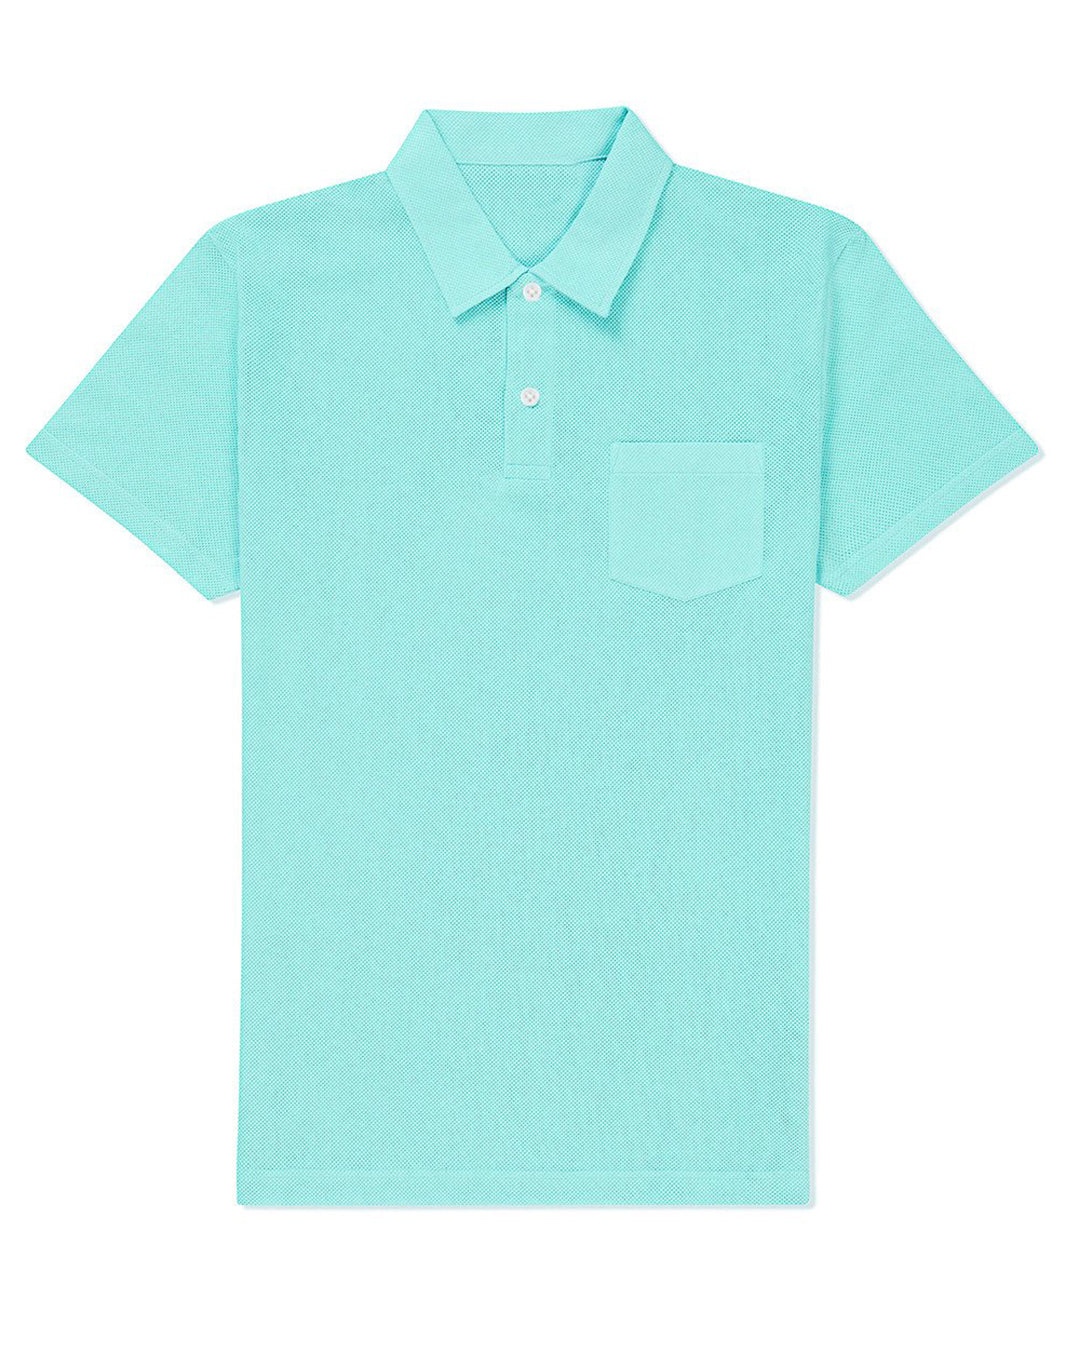 Front of the custom oxford polo shirt for men by Luxire in ice blue